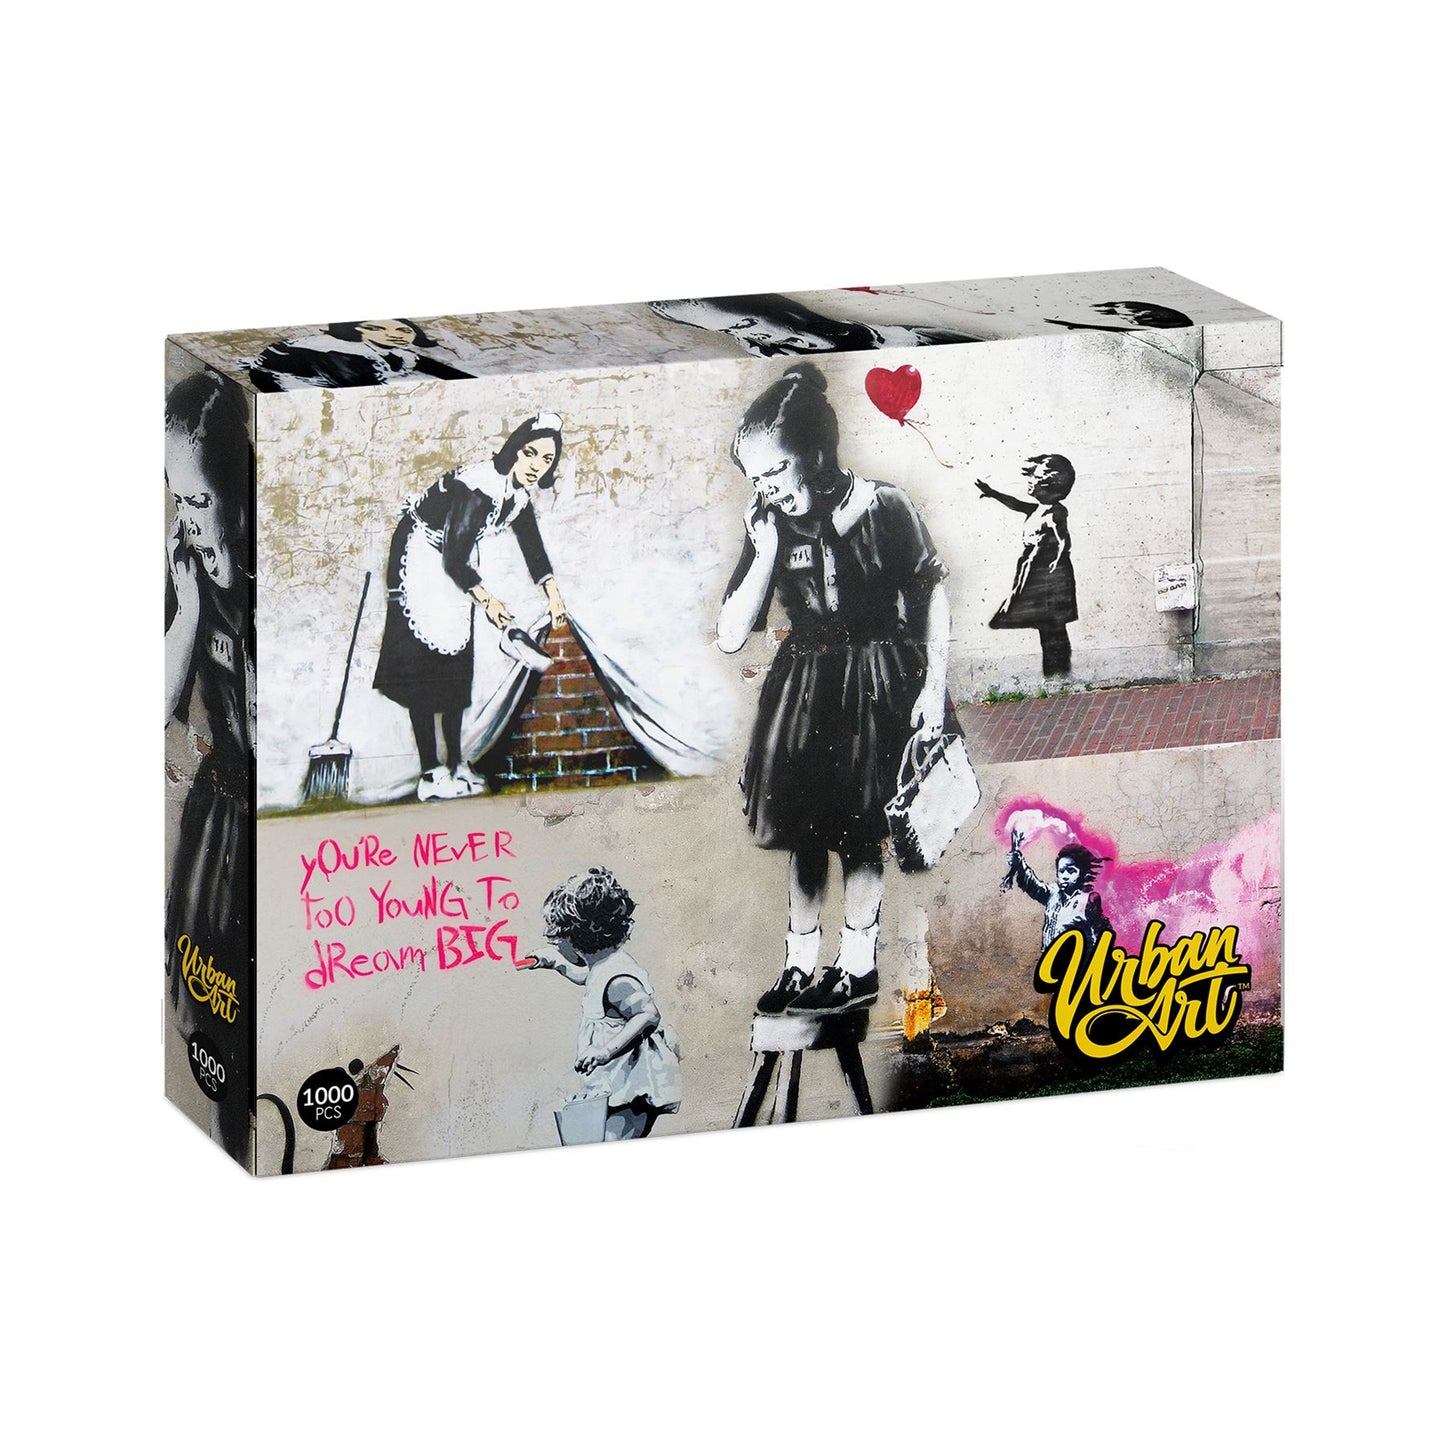 Banksy - Girl on a Stool 1000 Piece Jigsaw Puzzle